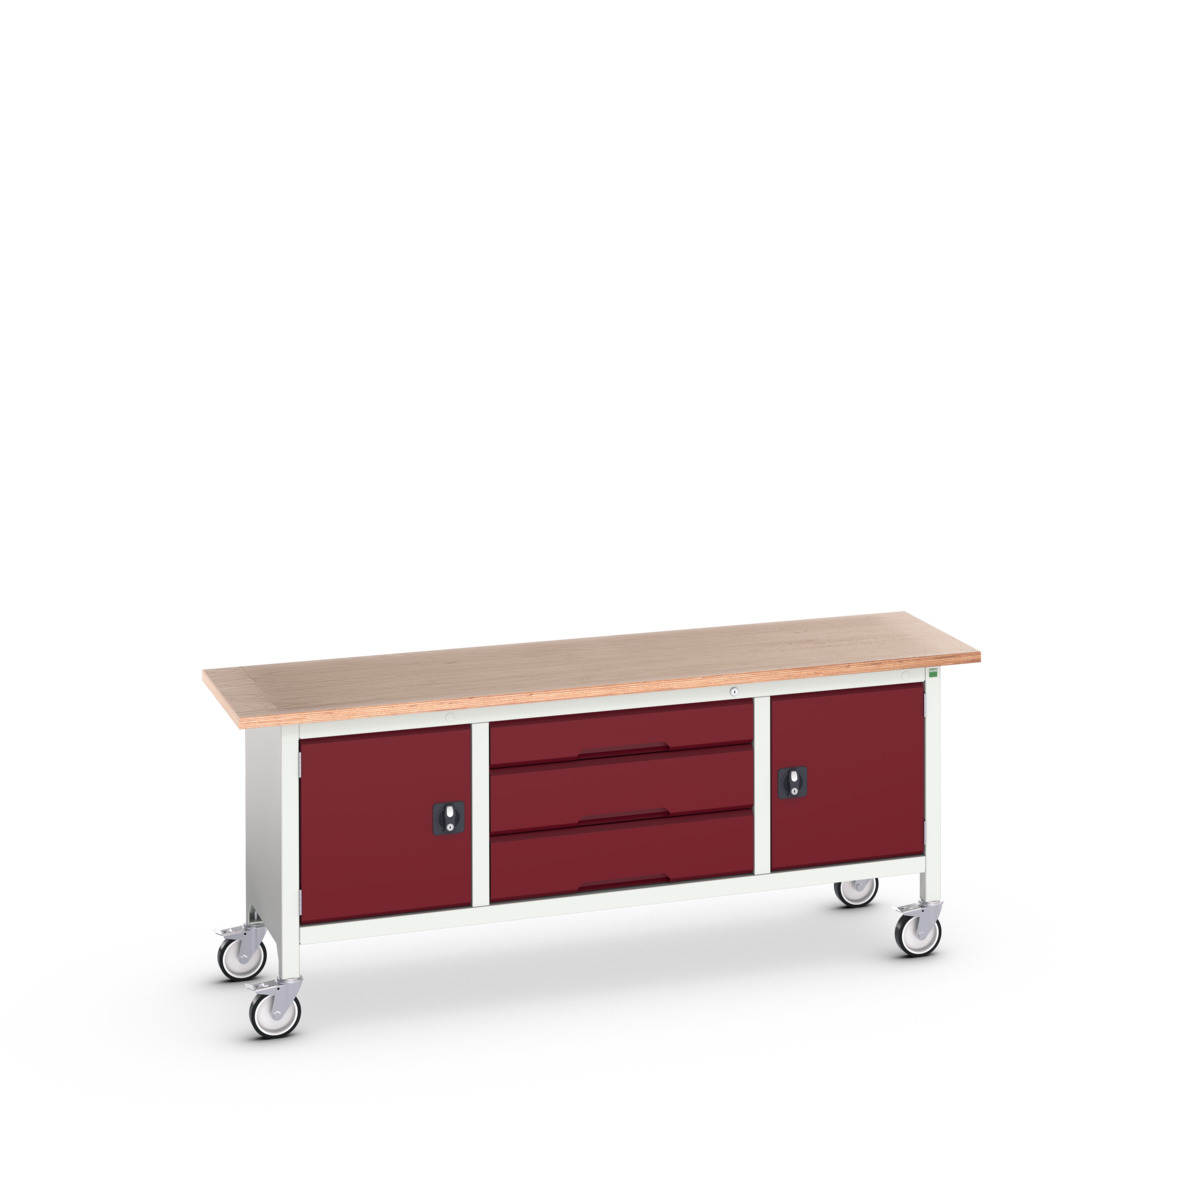 16923232.24 - verso mobile storage bench (mpx)